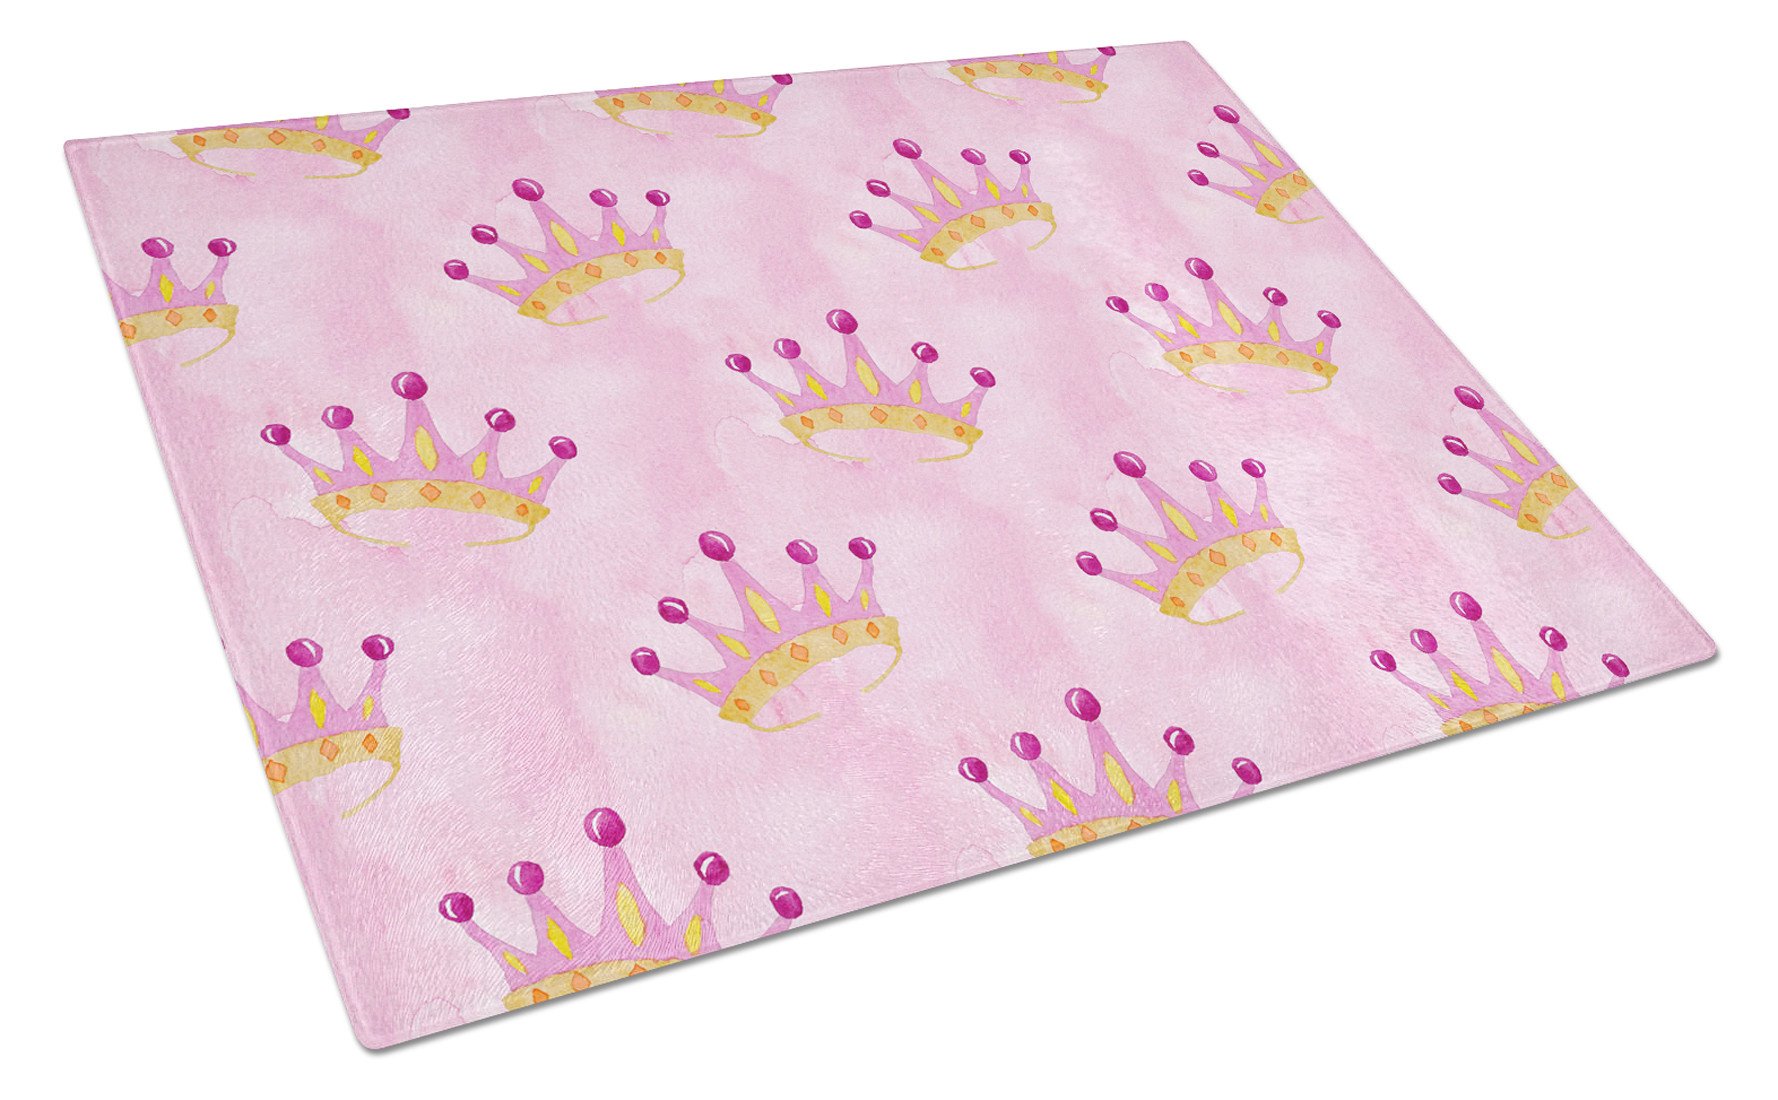 Watercolor Princess Crown on Pink Glass Cutting Board Large BB7546LCB by Caroline's Treasures